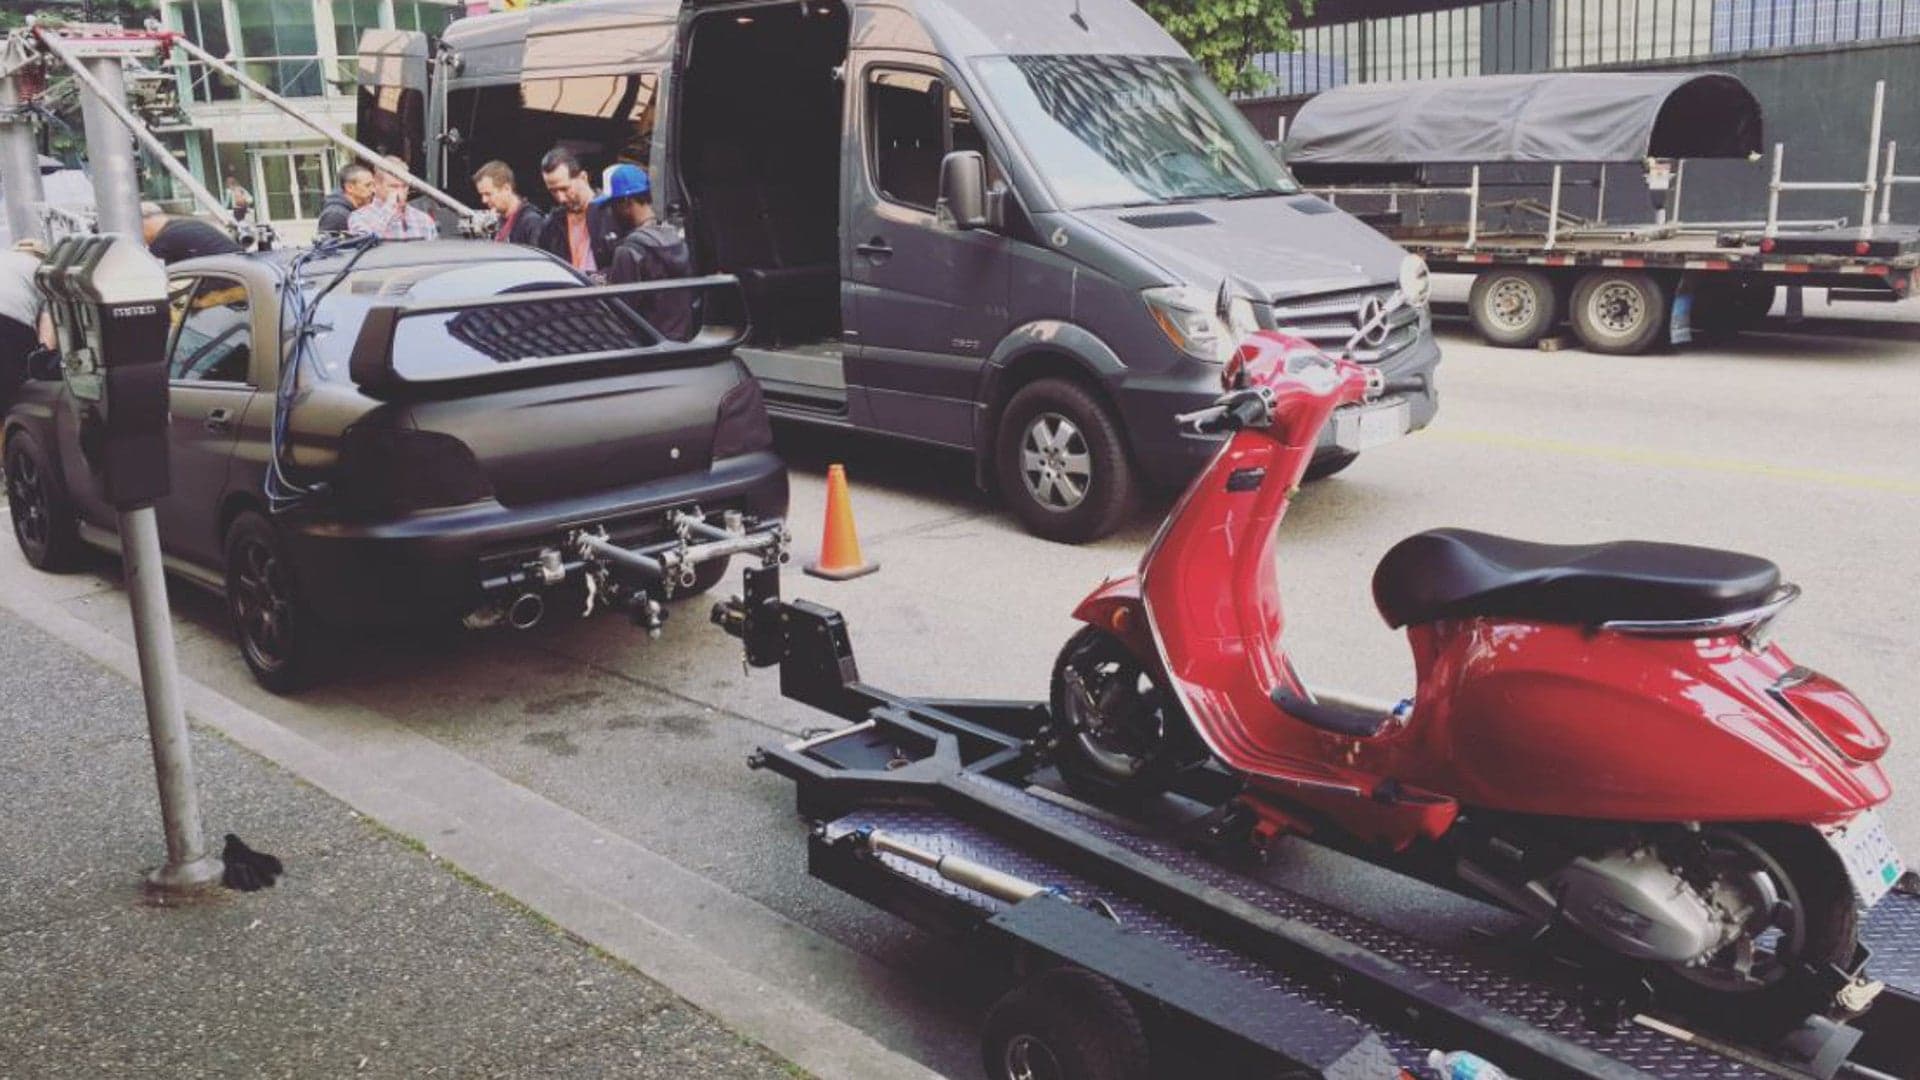 Blacked-Out Subaru WRX STi Camera Car Being Used in Filming of Deadpool 2